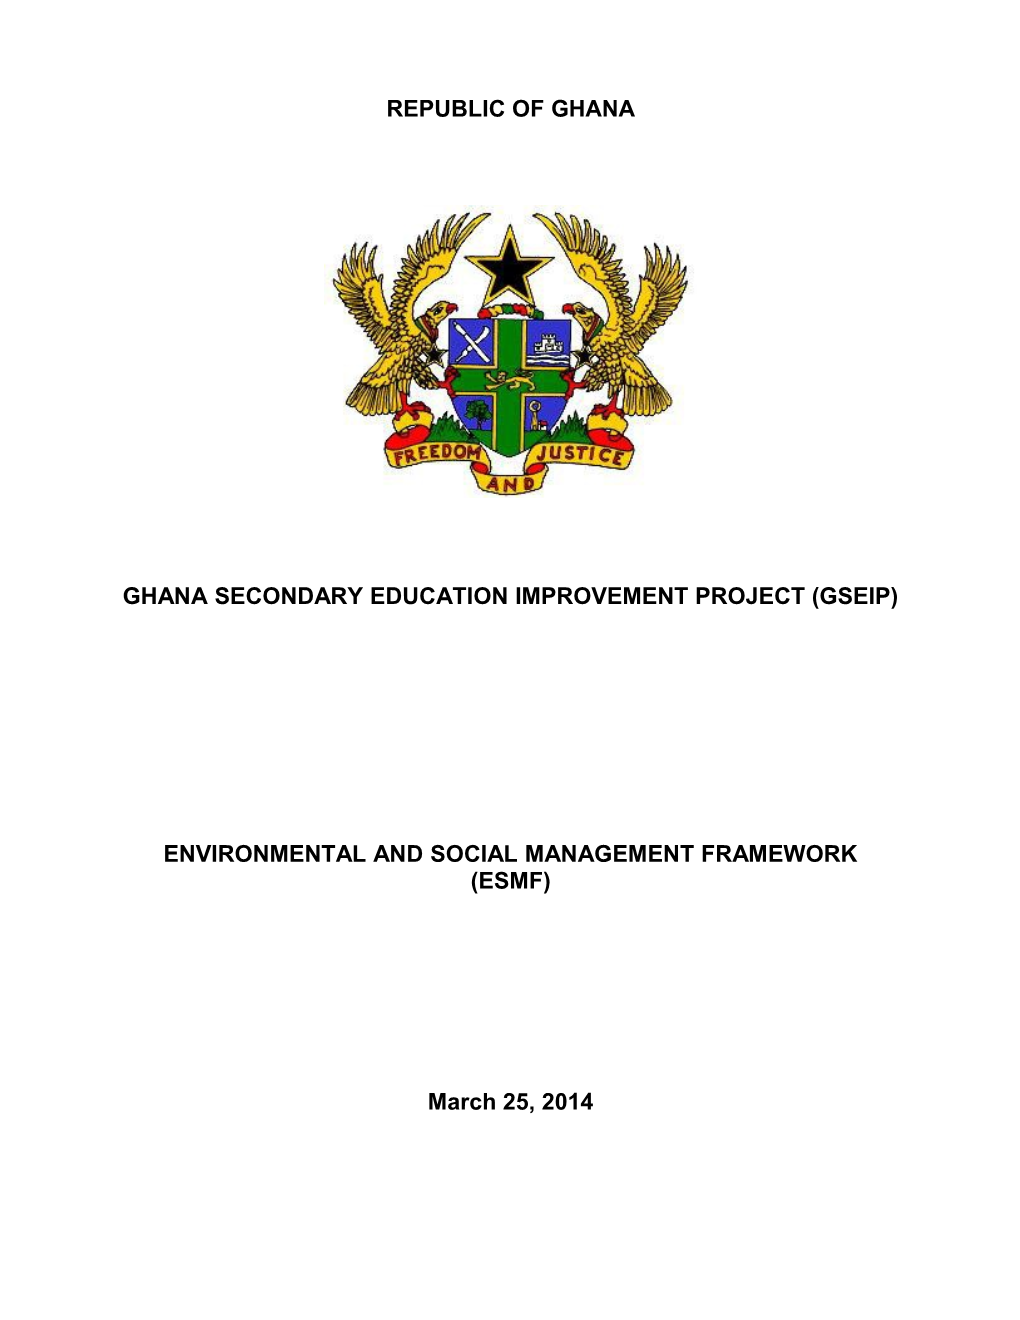 Ghana Secondary Education Improvement Project (Gseip)